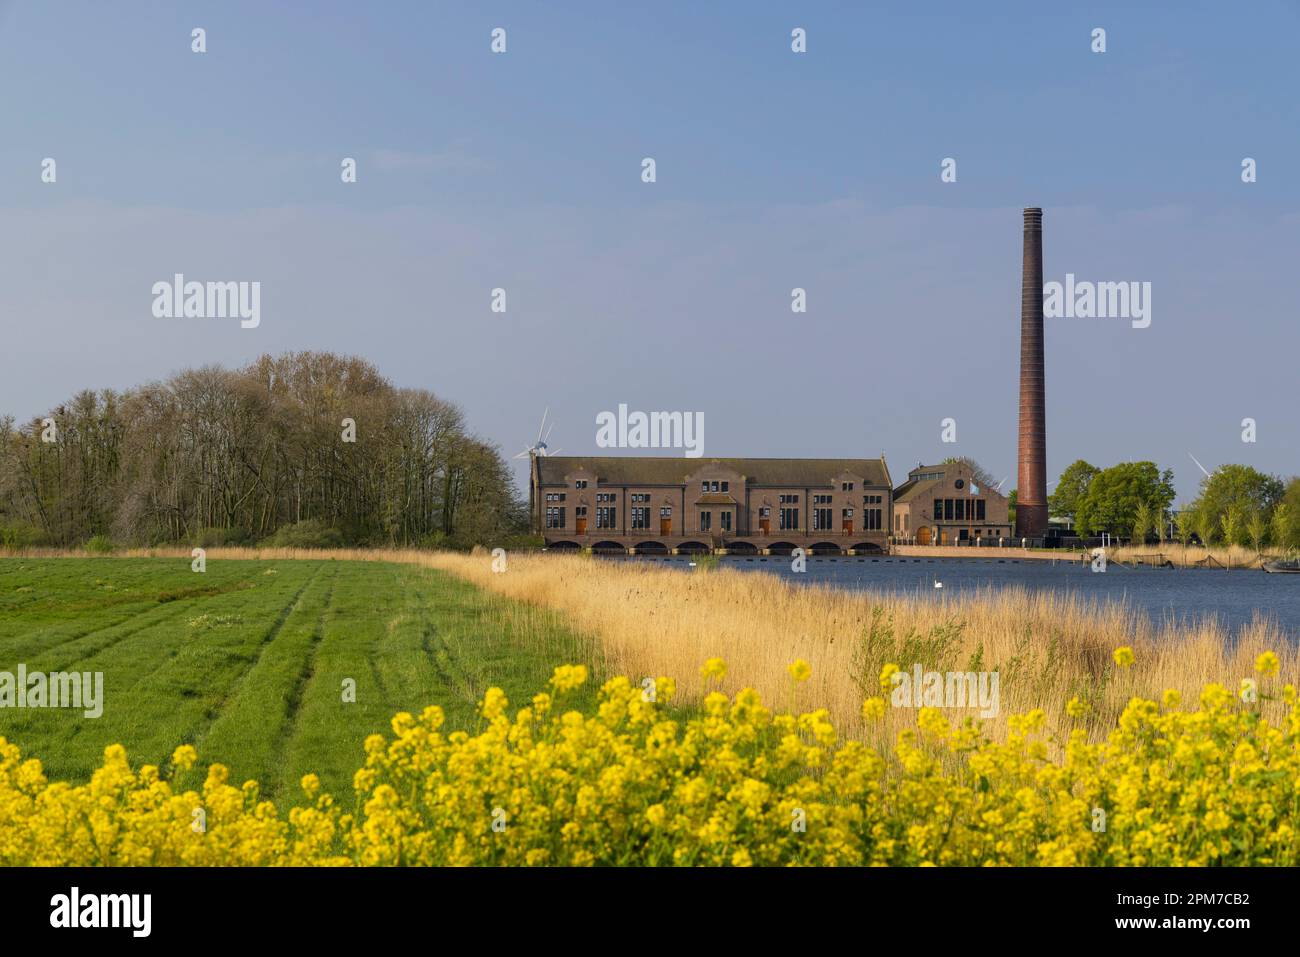 Ir. D. F. Woudagemaal is the largest steam pumping station ever built in world, UNESCO site, Lemmer, Friesland, Netherlands. Stock Photo